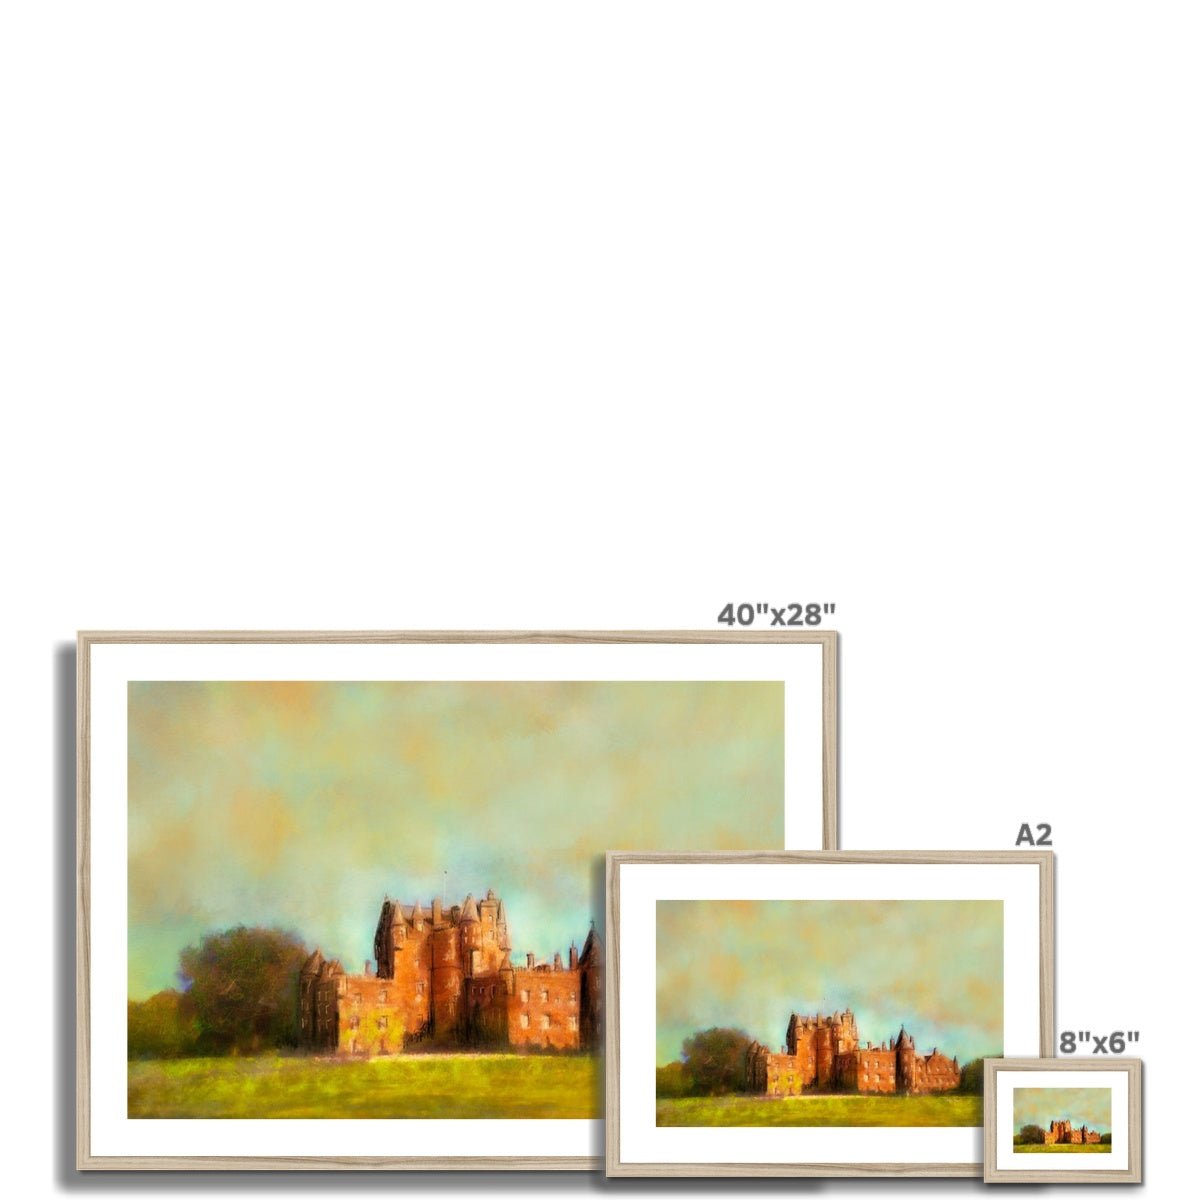 Glamis Castle Painting | Framed & Mounted Prints From Scotland-Framed & Mounted Prints-Historic & Iconic Scotland Art Gallery-Paintings, Prints, Homeware, Art Gifts From Scotland By Scottish Artist Kevin Hunter